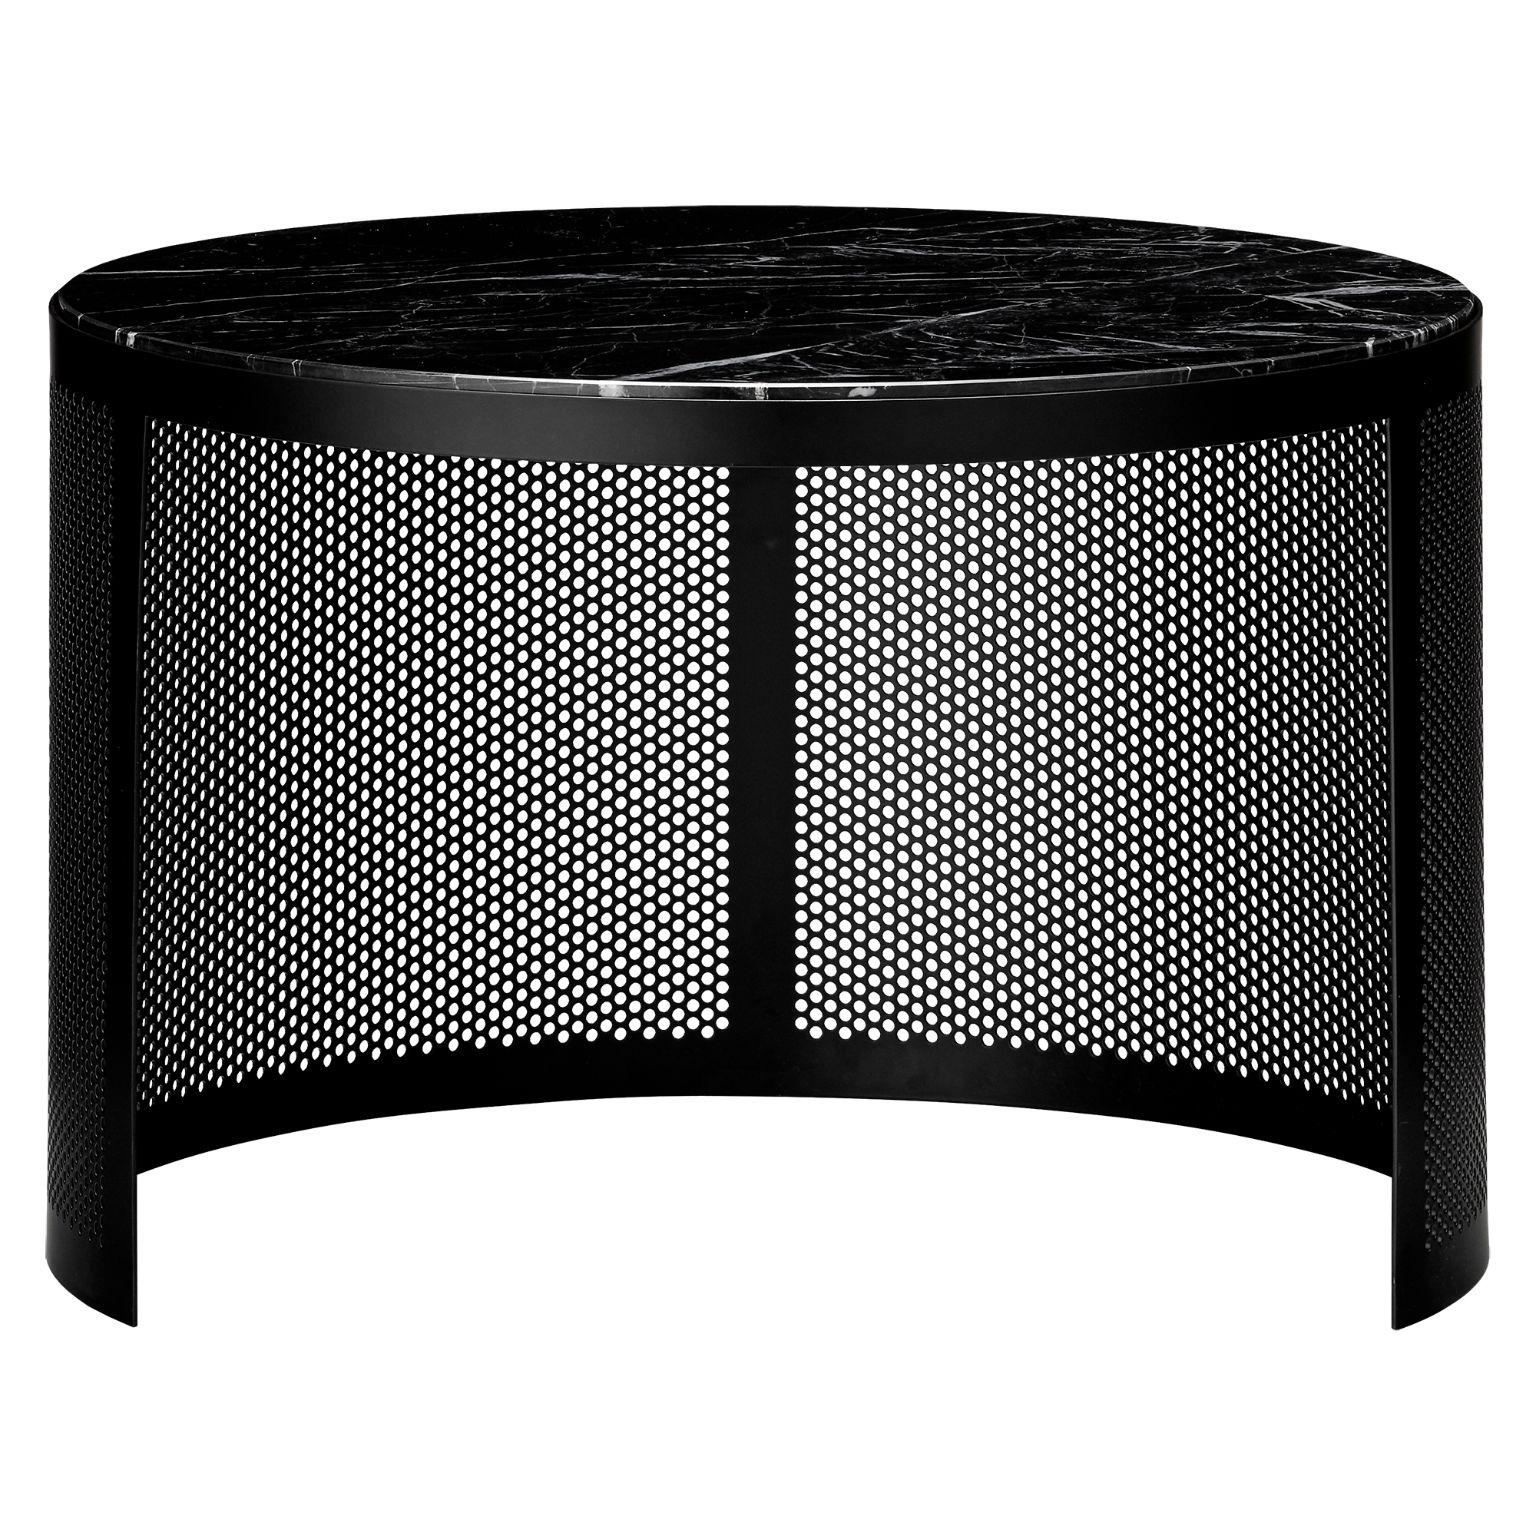 Marble and steel contemporary small side table
Dimensions: Ø 46 x H 30.2 cm
Materials: Marble and steel

This tables can be placed in any room that calls for extra creative space. They are made of perforated metal in black and have either a high